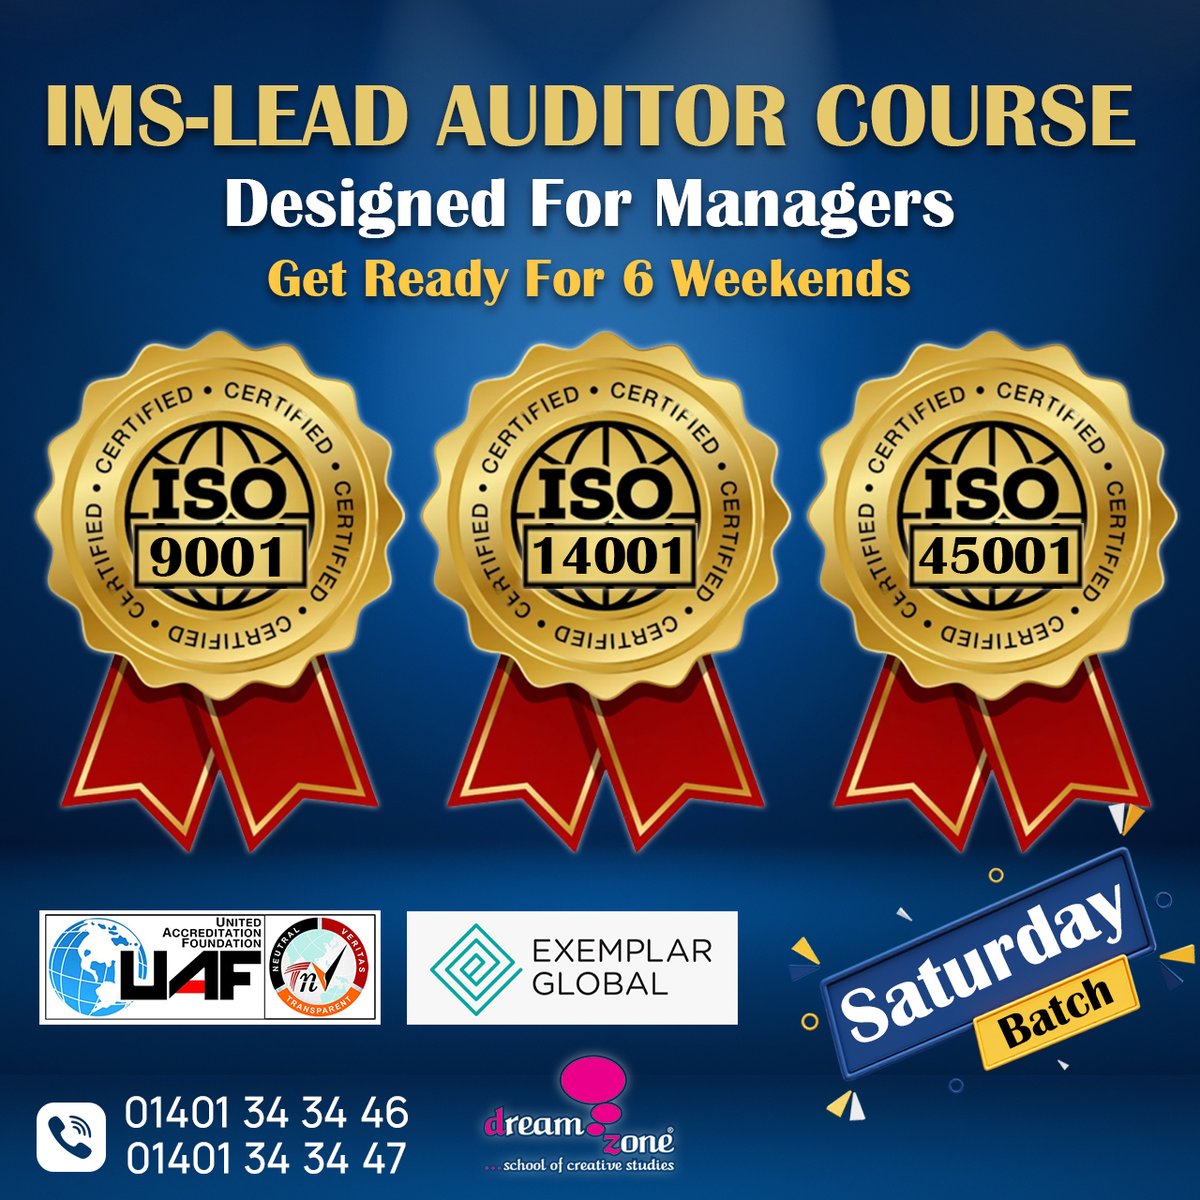 📷 Integrated Management System [IMS]
Lead Auditor Course 📷

📷 SATURDAY BATCH 📷

📷 REACH US:
📷 Contact: +880 1401 34 34 46 & +880 1401 34 34 47
📷 dreamzonebd.com

#dreamzonebd #Integratedmanagementsystem #leadauditortraining
#LeadAuditorCourse #LeadAuditor #ims